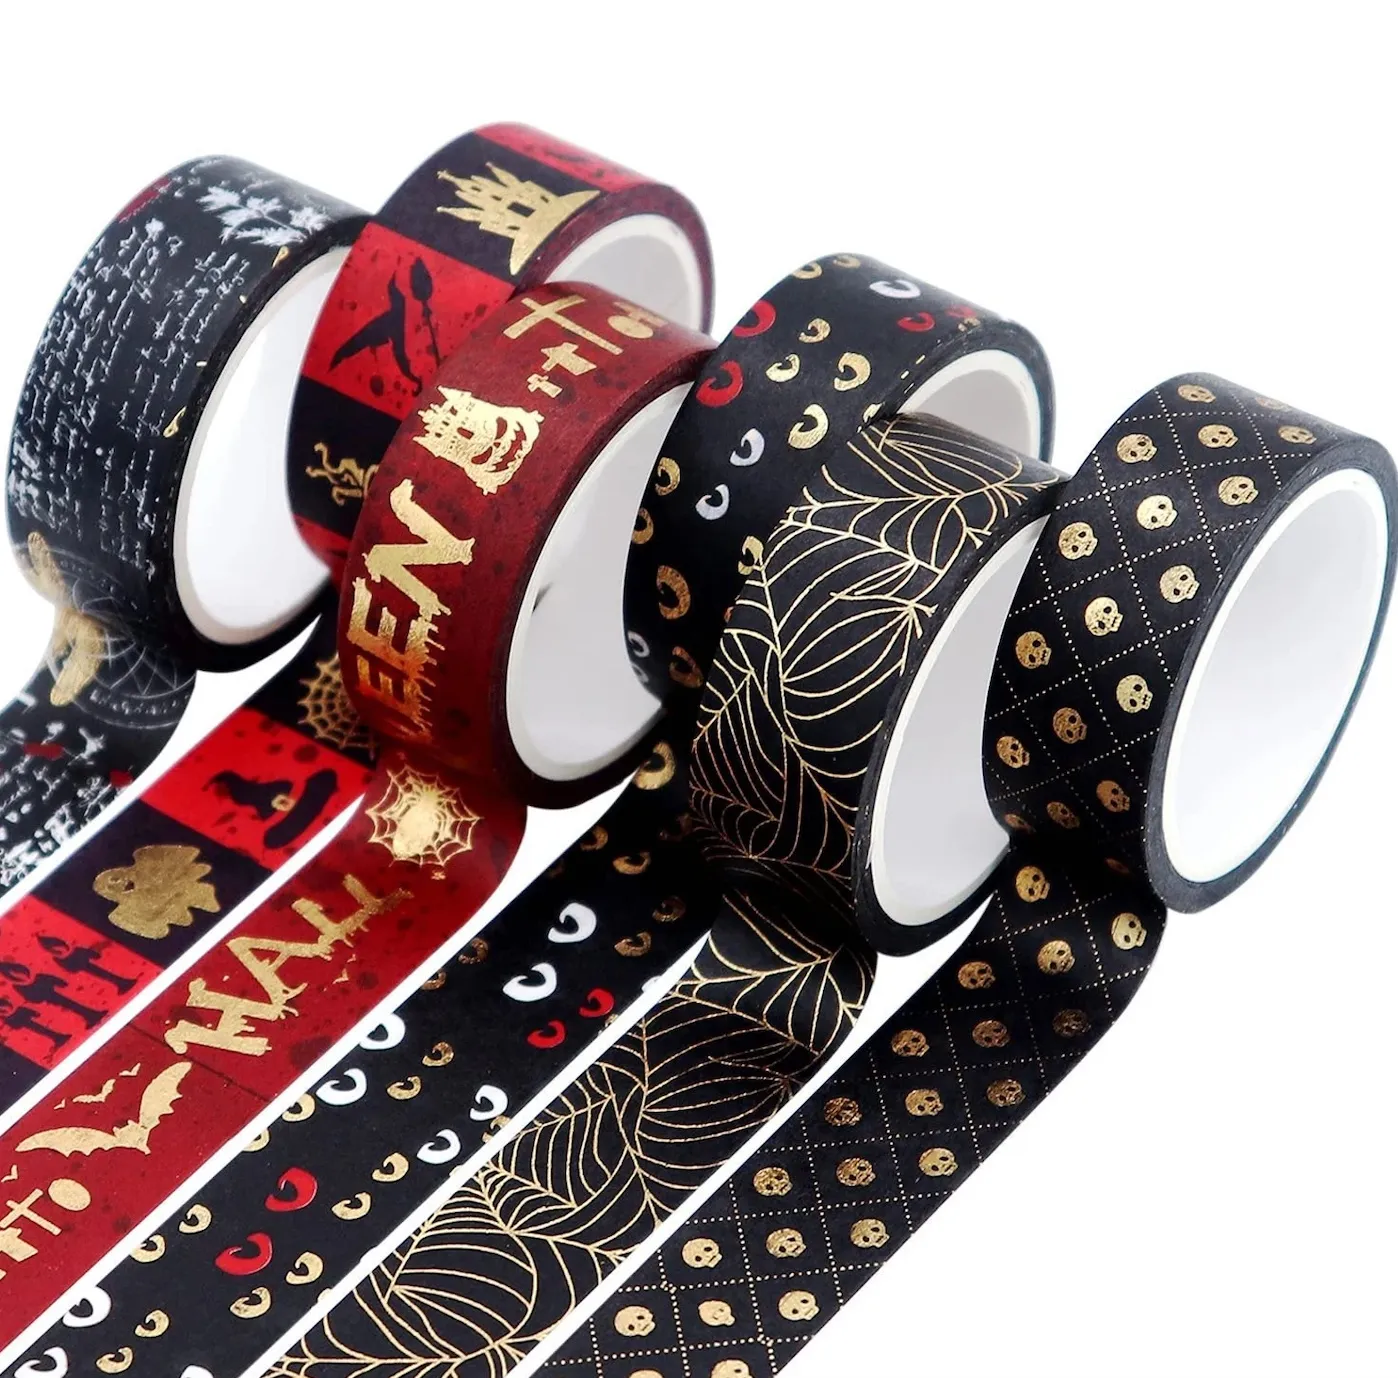 6 rolls of washi tape. Black with gold skulls, black with gold spider webs, black with spooky eyes, red with gold Halloween, black with abstract pictures